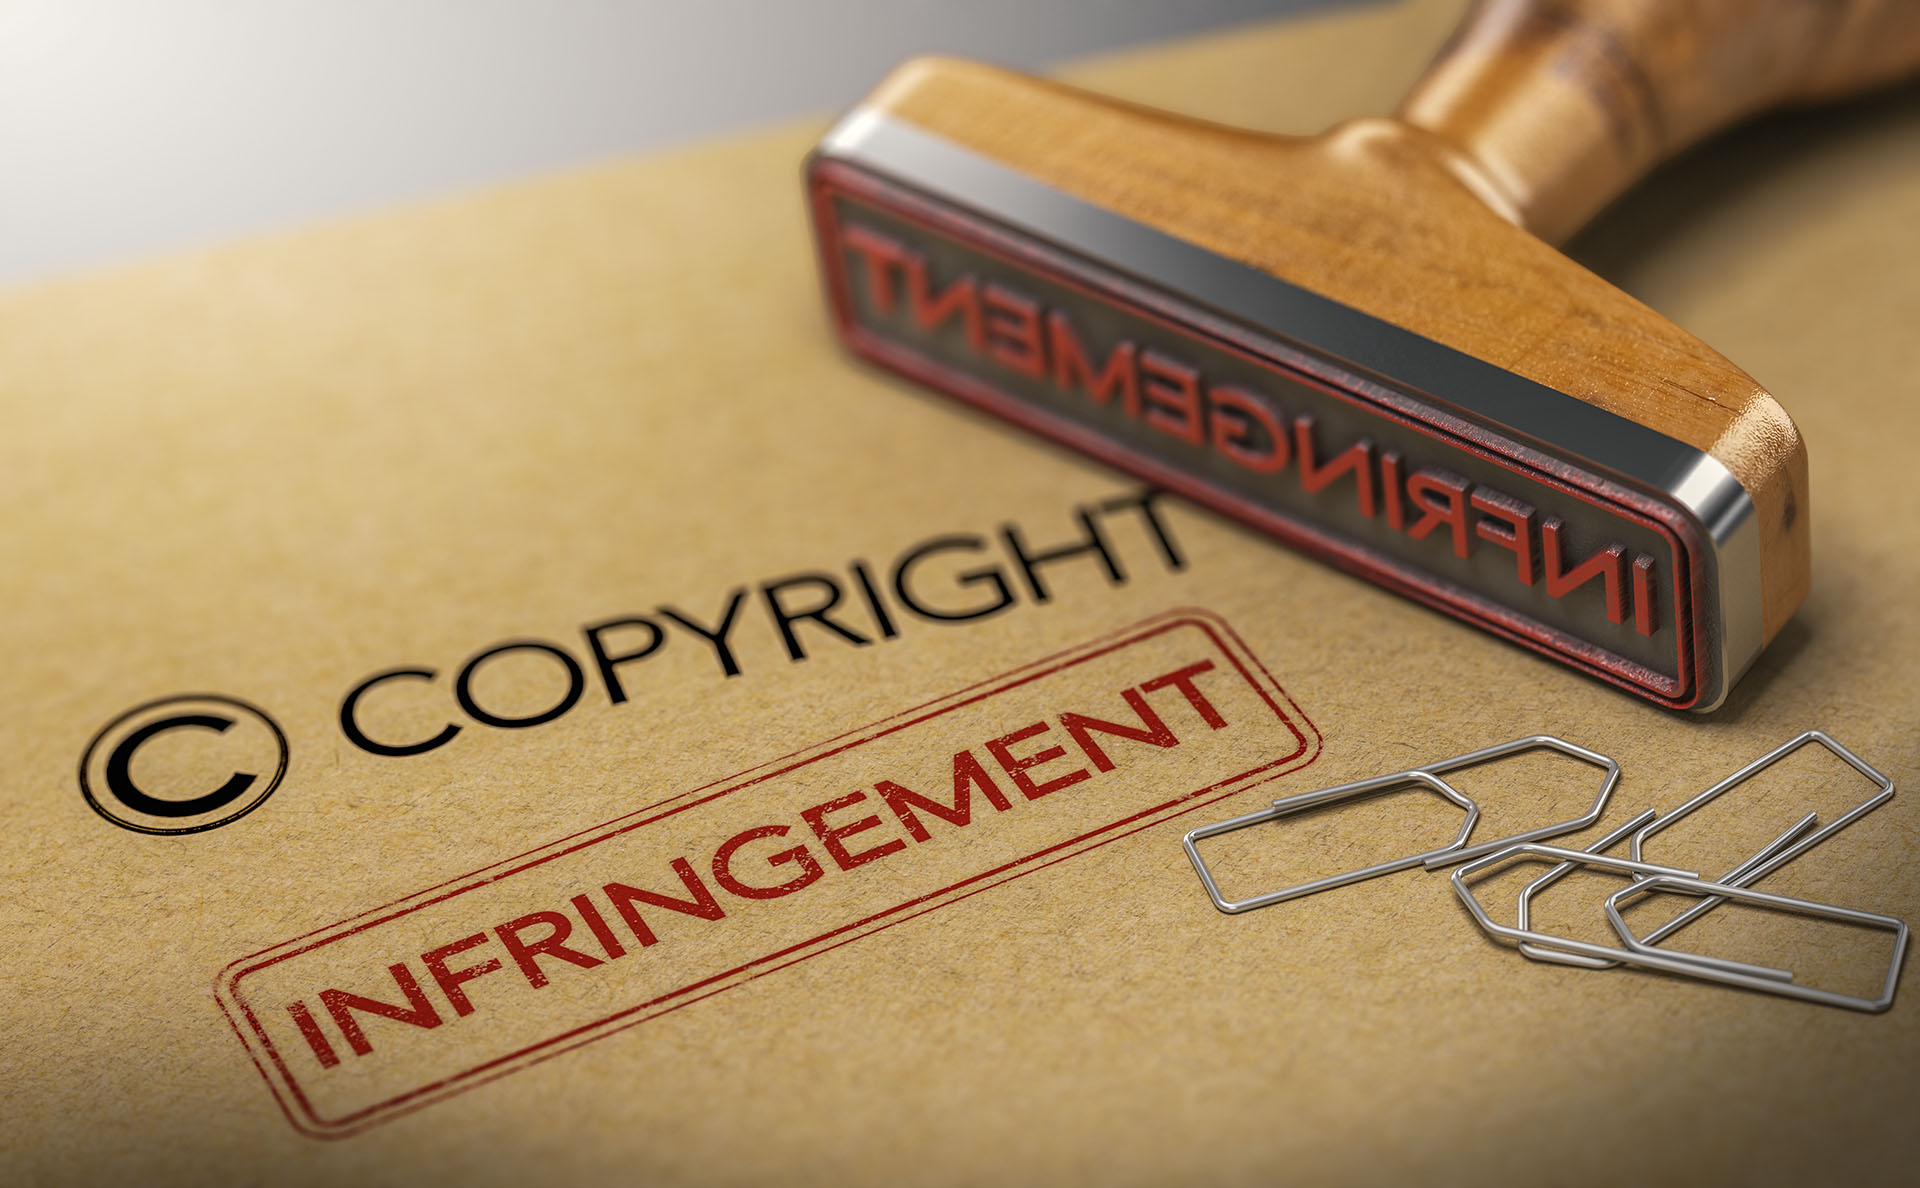 Amazon Brand Registry: A DIY Approach to IP Rights Enforcement